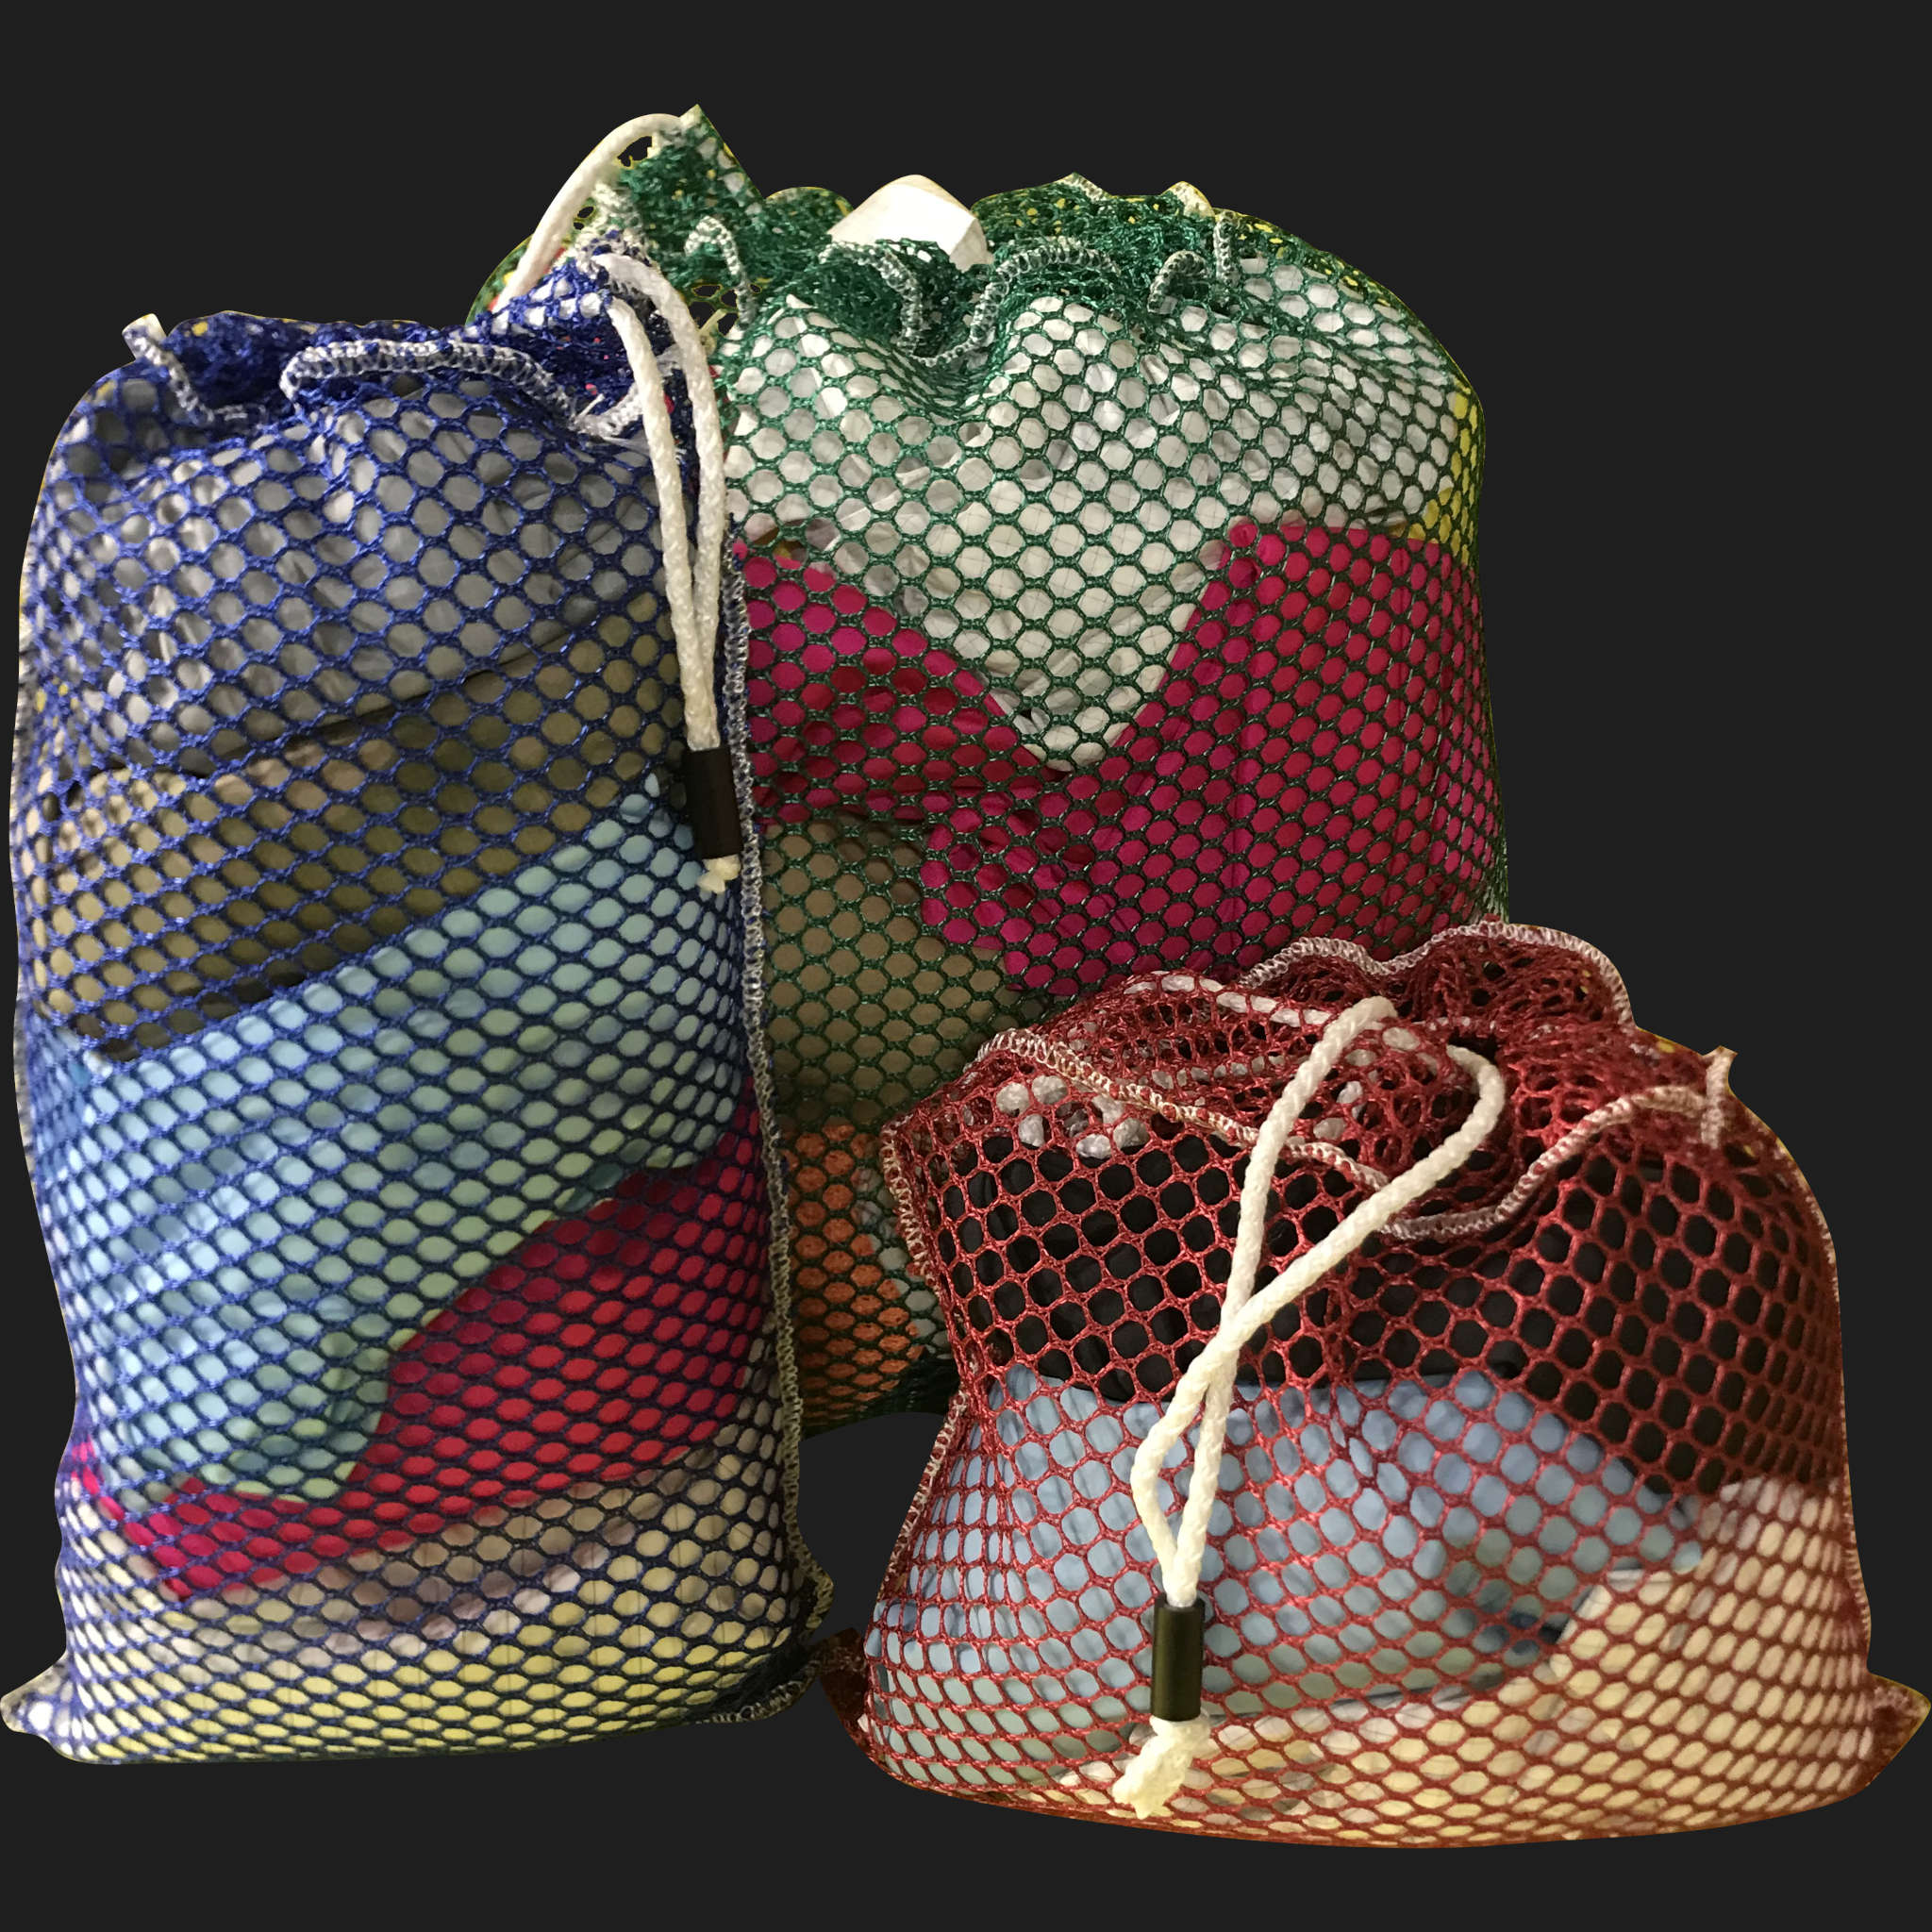 22" x 36" Customized Mesh-Net-Laundry Bags Heavy Duty with Cord and barrellock closure